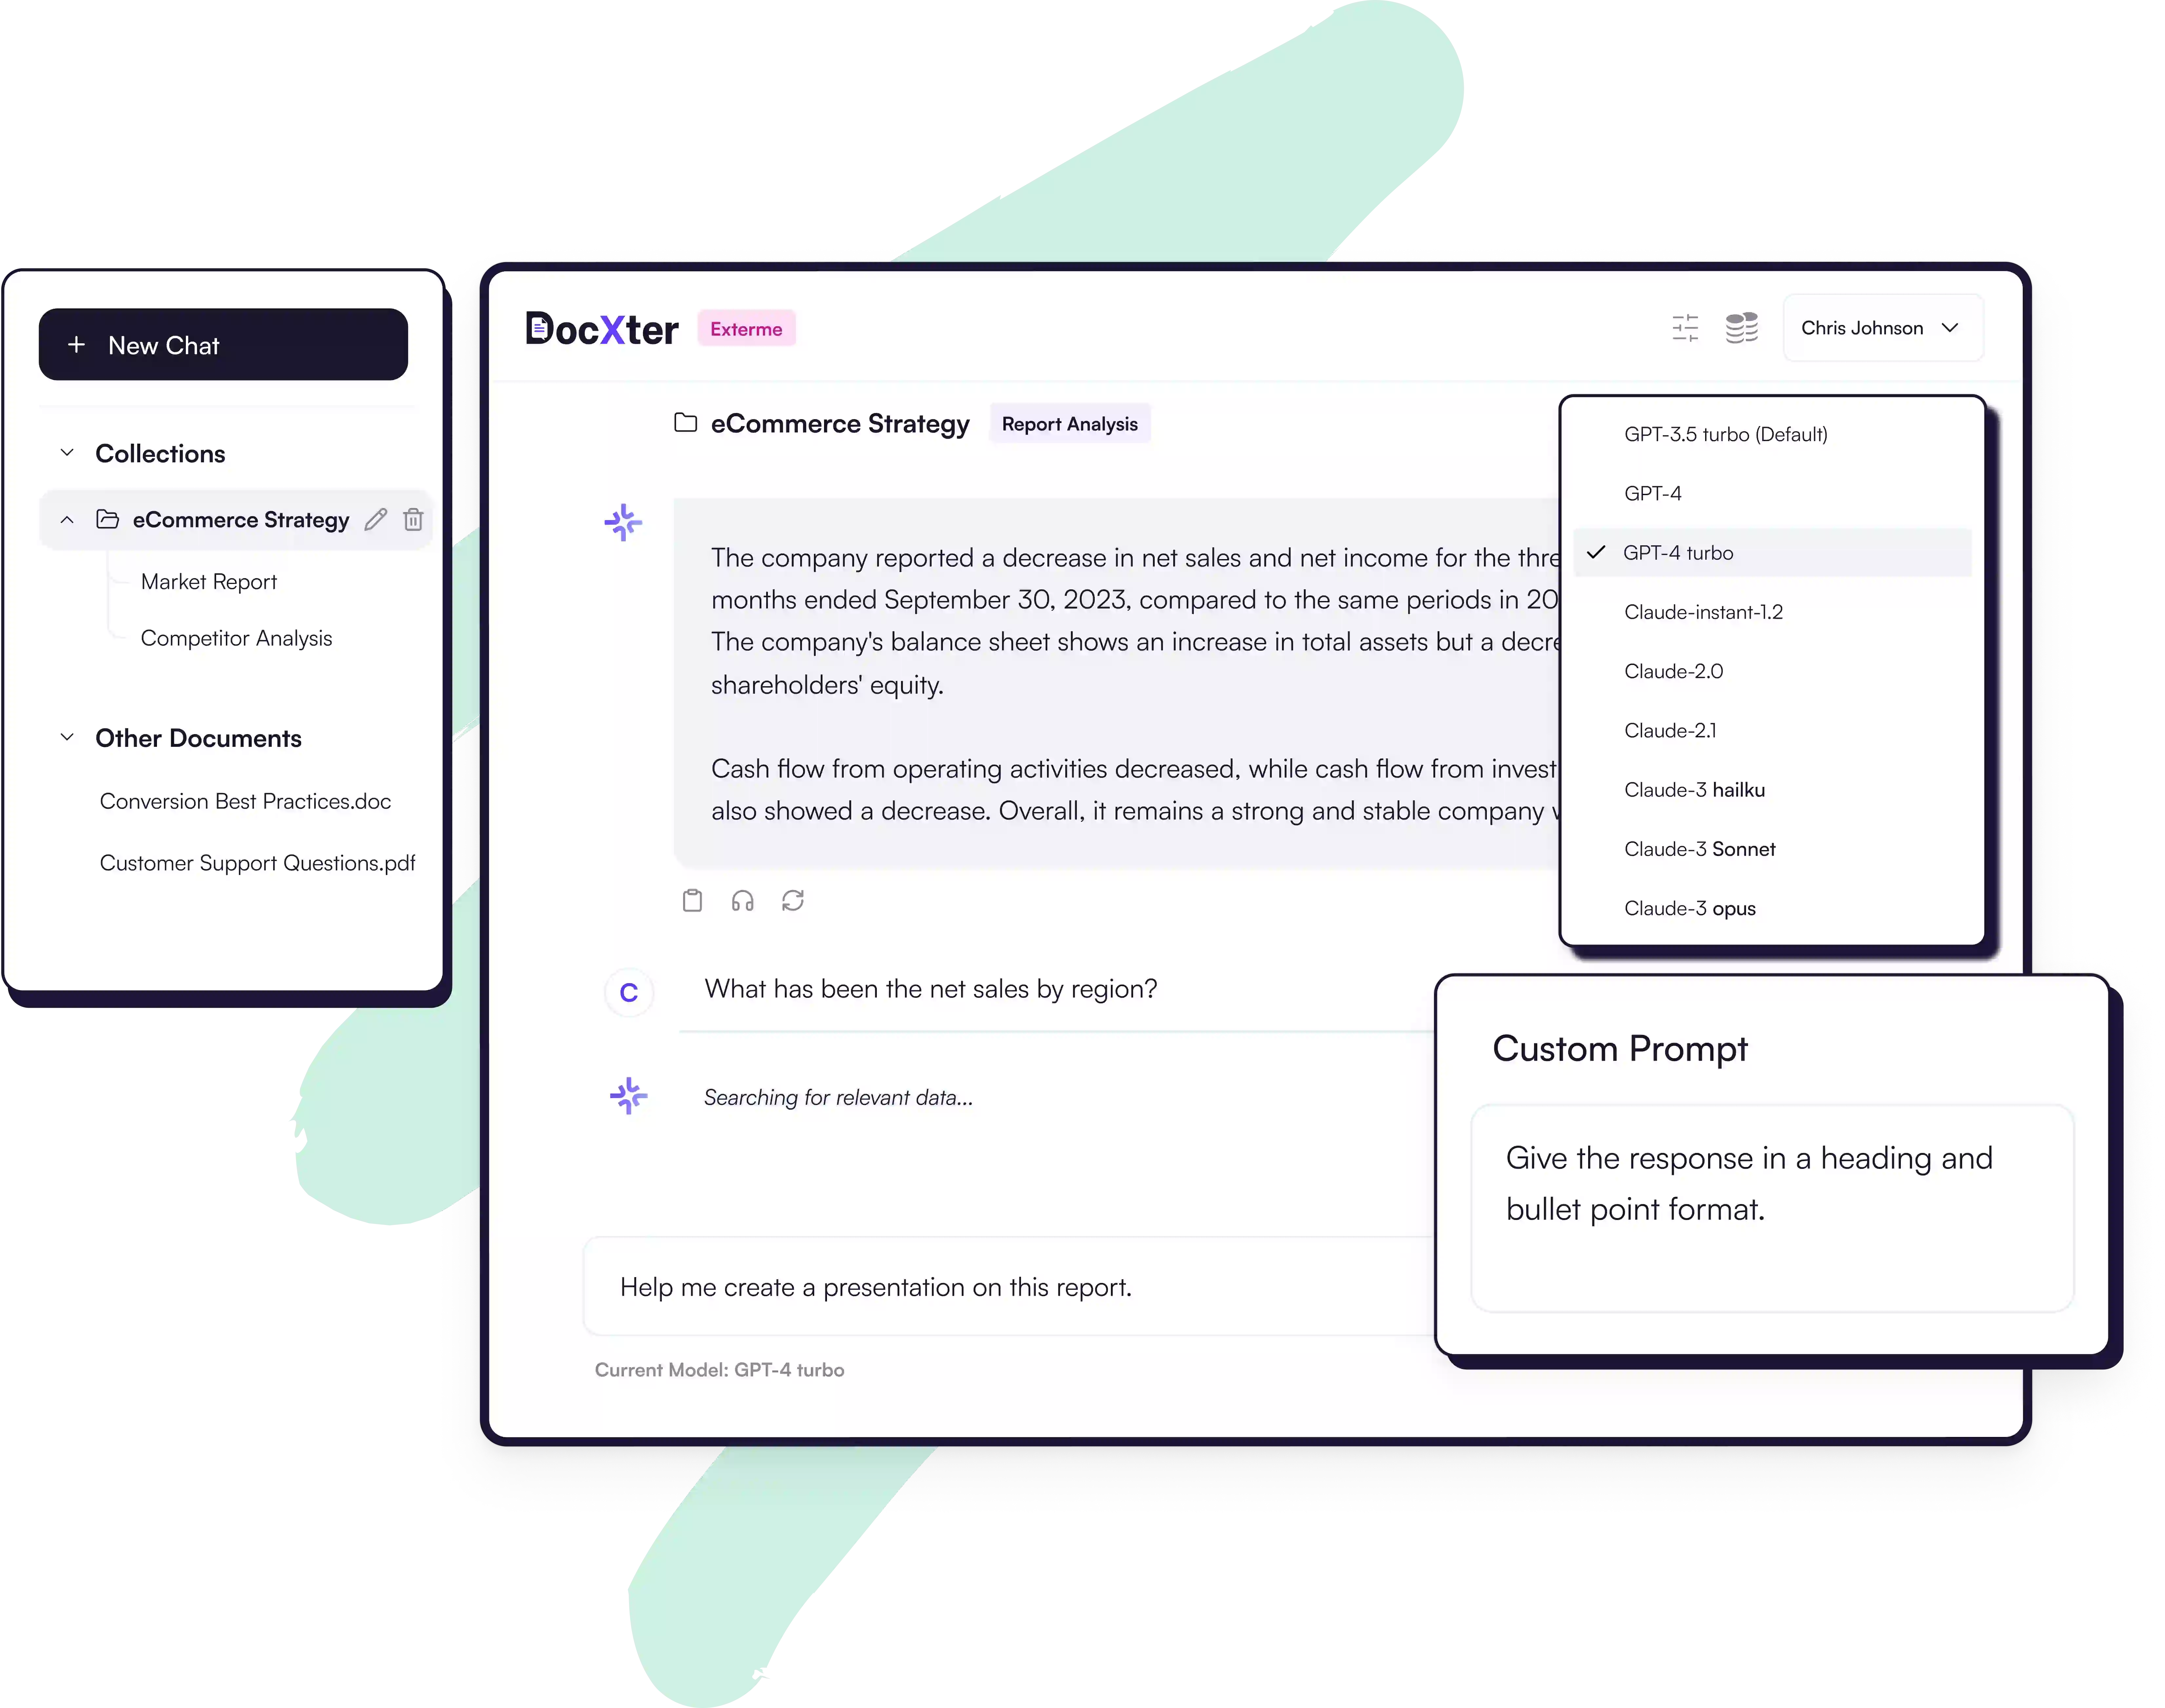 Image: DocXter for working professionals